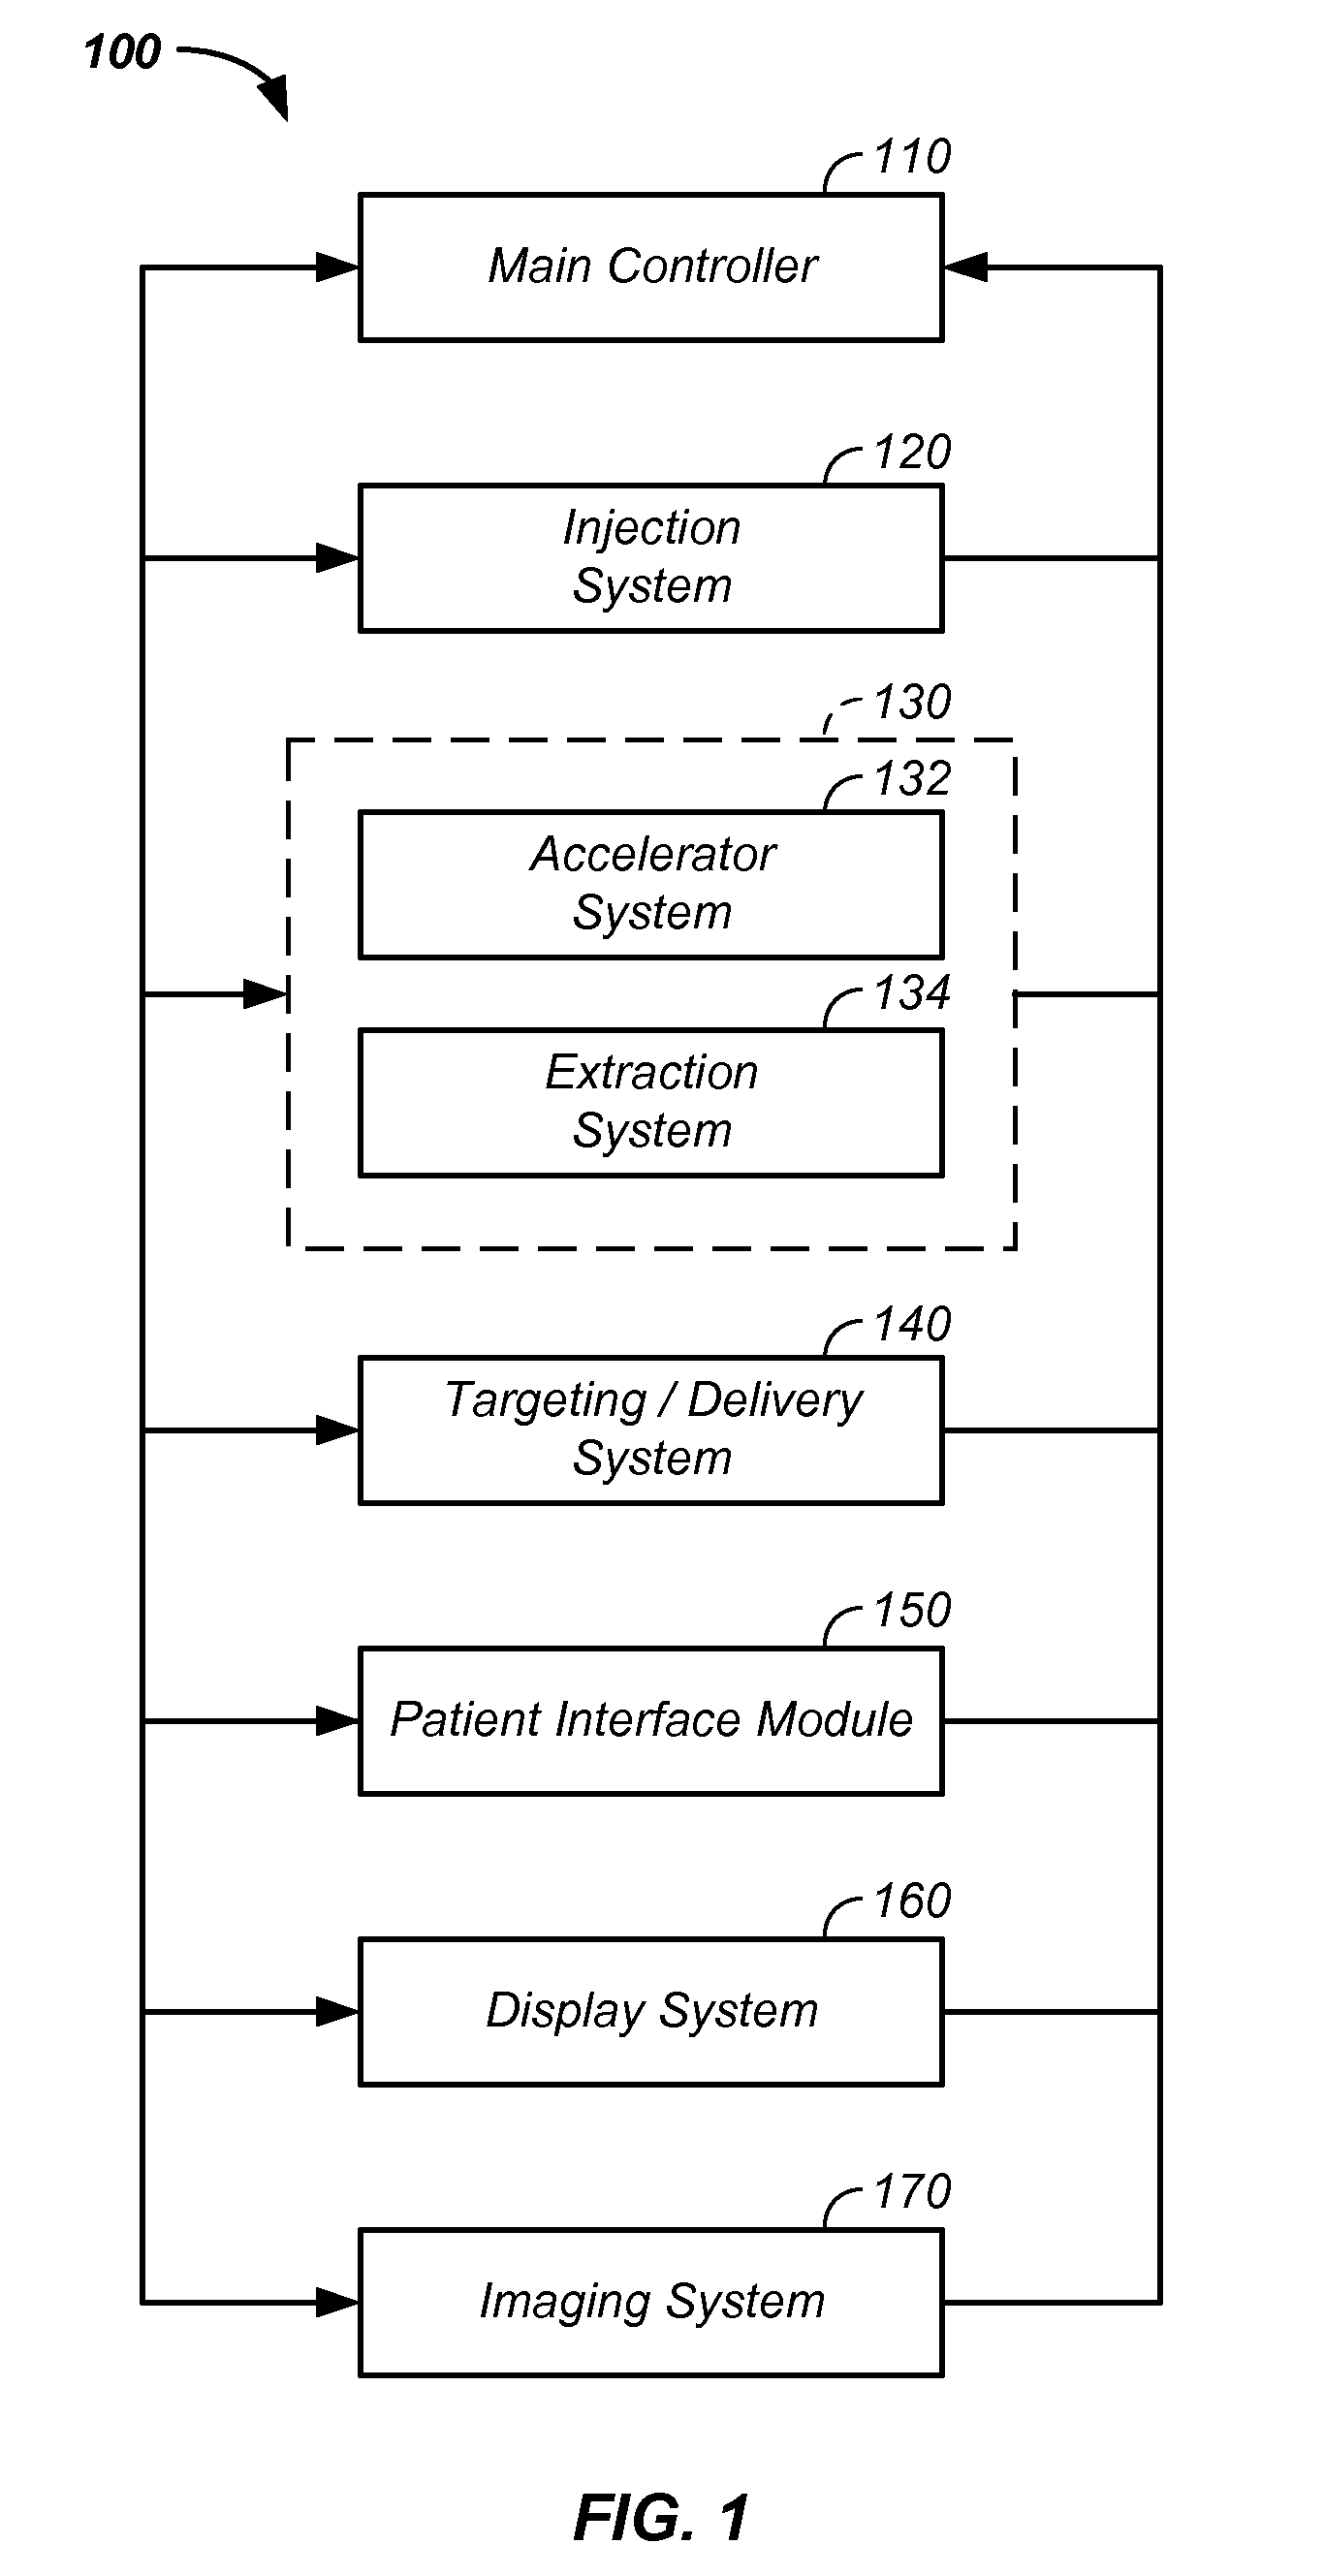 Synchrotron power supply apparatus and method of use thereof